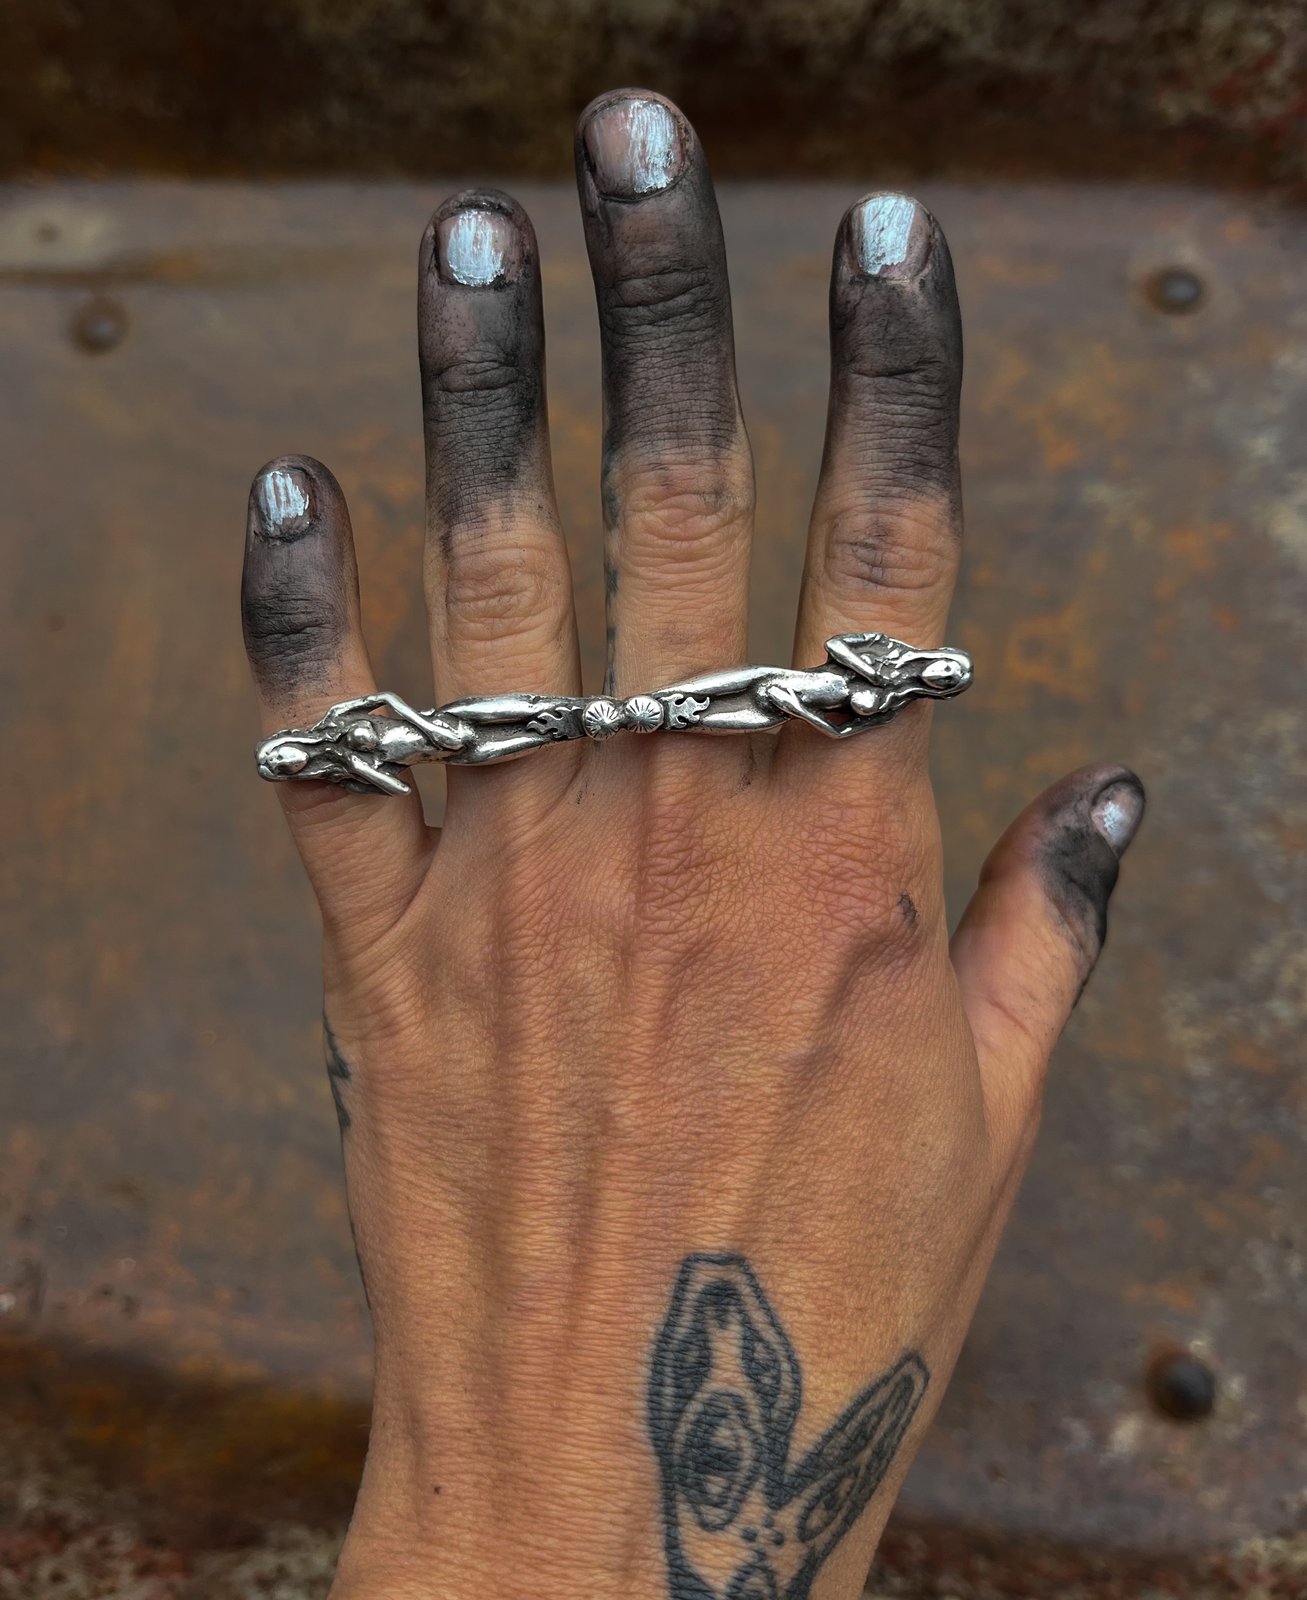 Black Iron Knuckle Duster